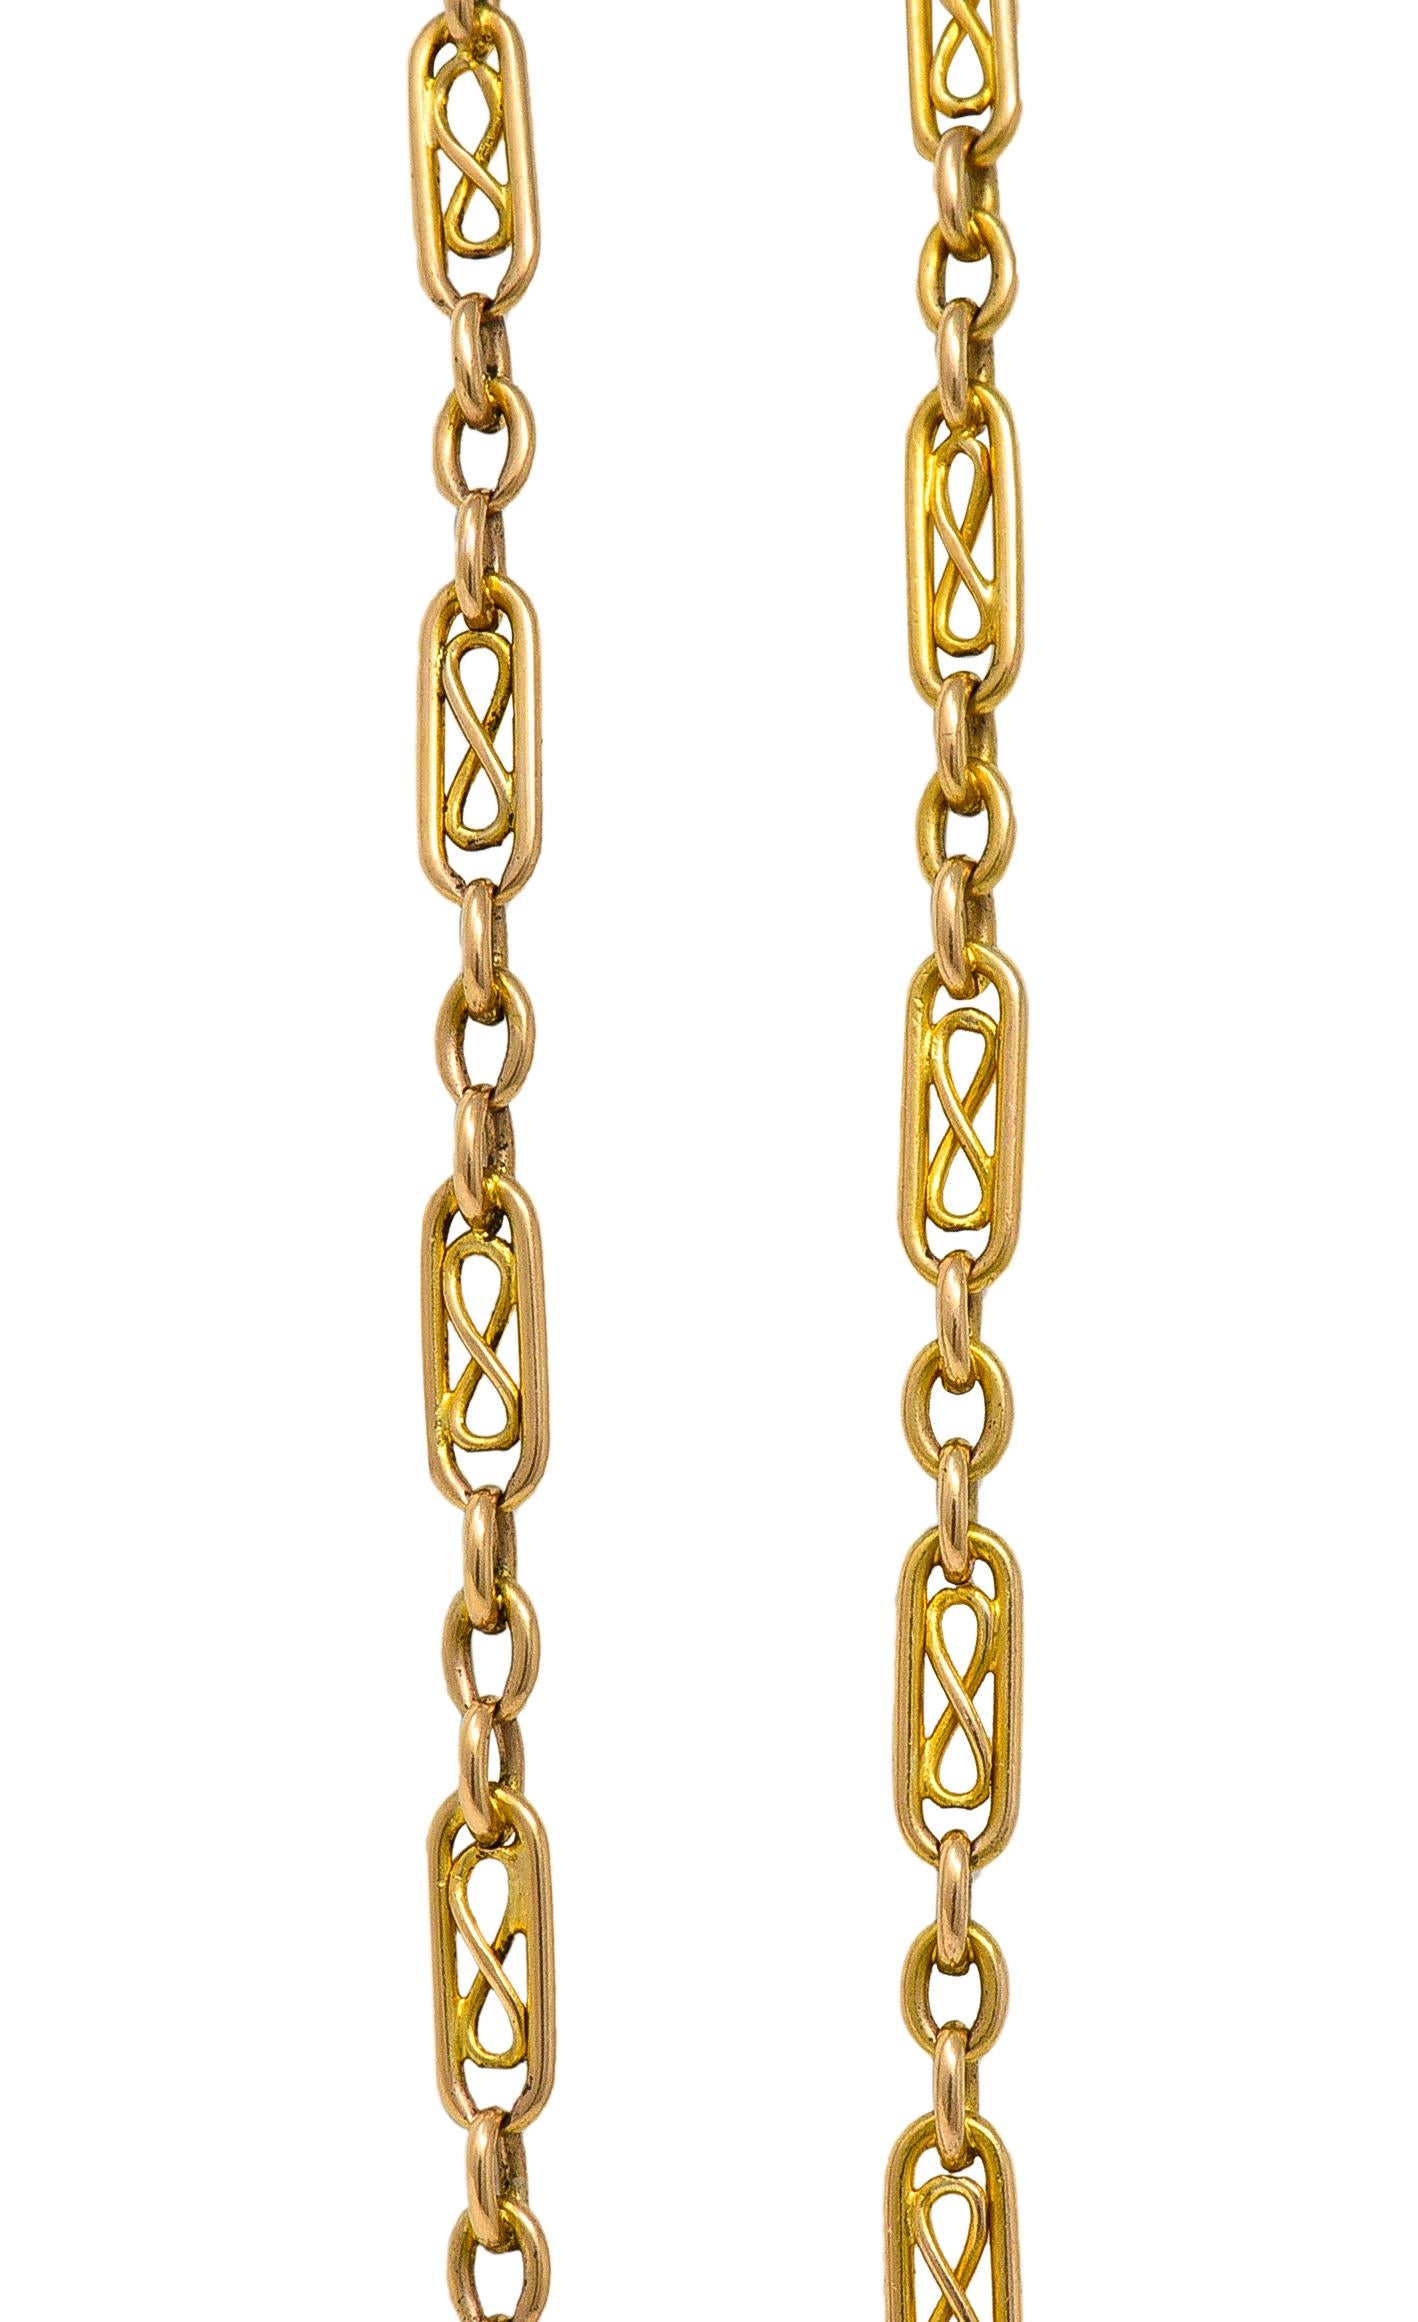 Victorian 14 Karat Yellow Gold Link 64 1/2 IN Long Antique Fob Chain Necklace For Sale 1